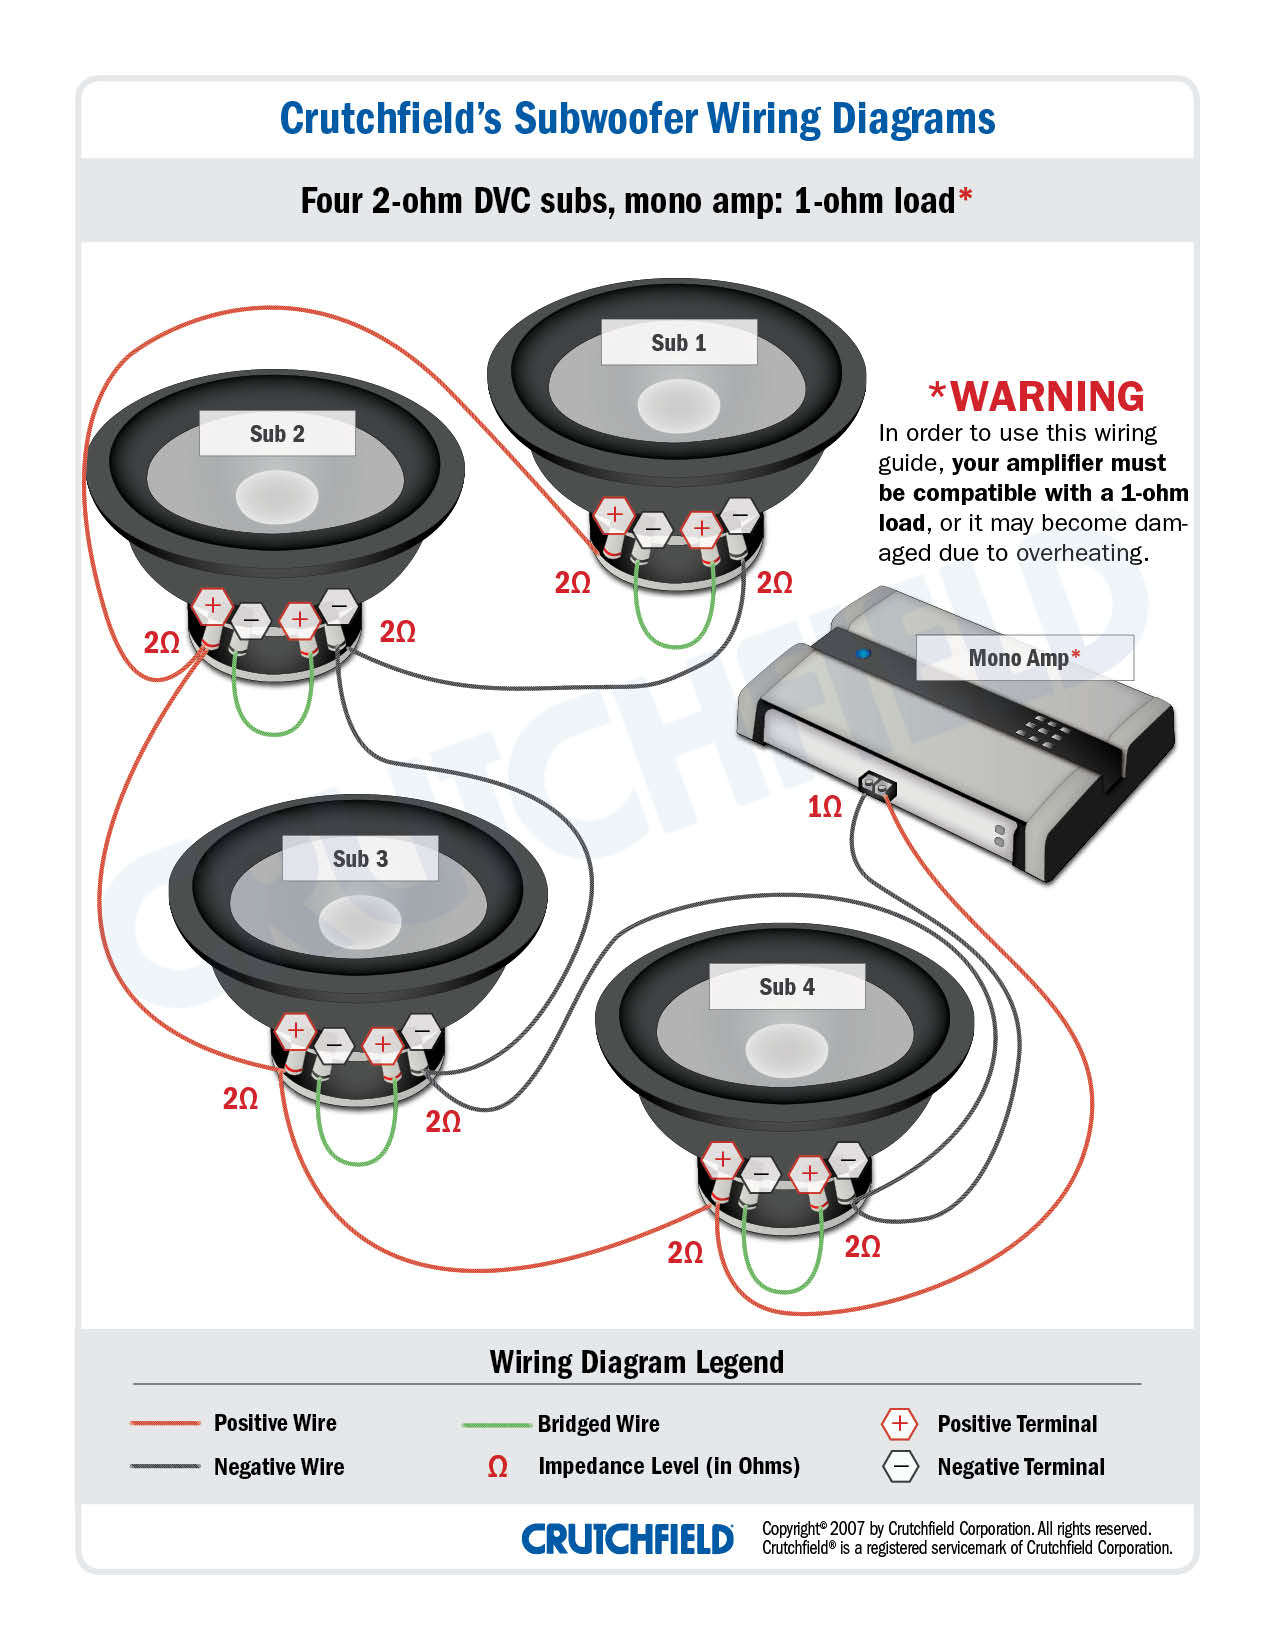 Wiring Subwoofers — What's All This About Ohms?  4 Ohm Sub Wiring Diagram    Crutchfield